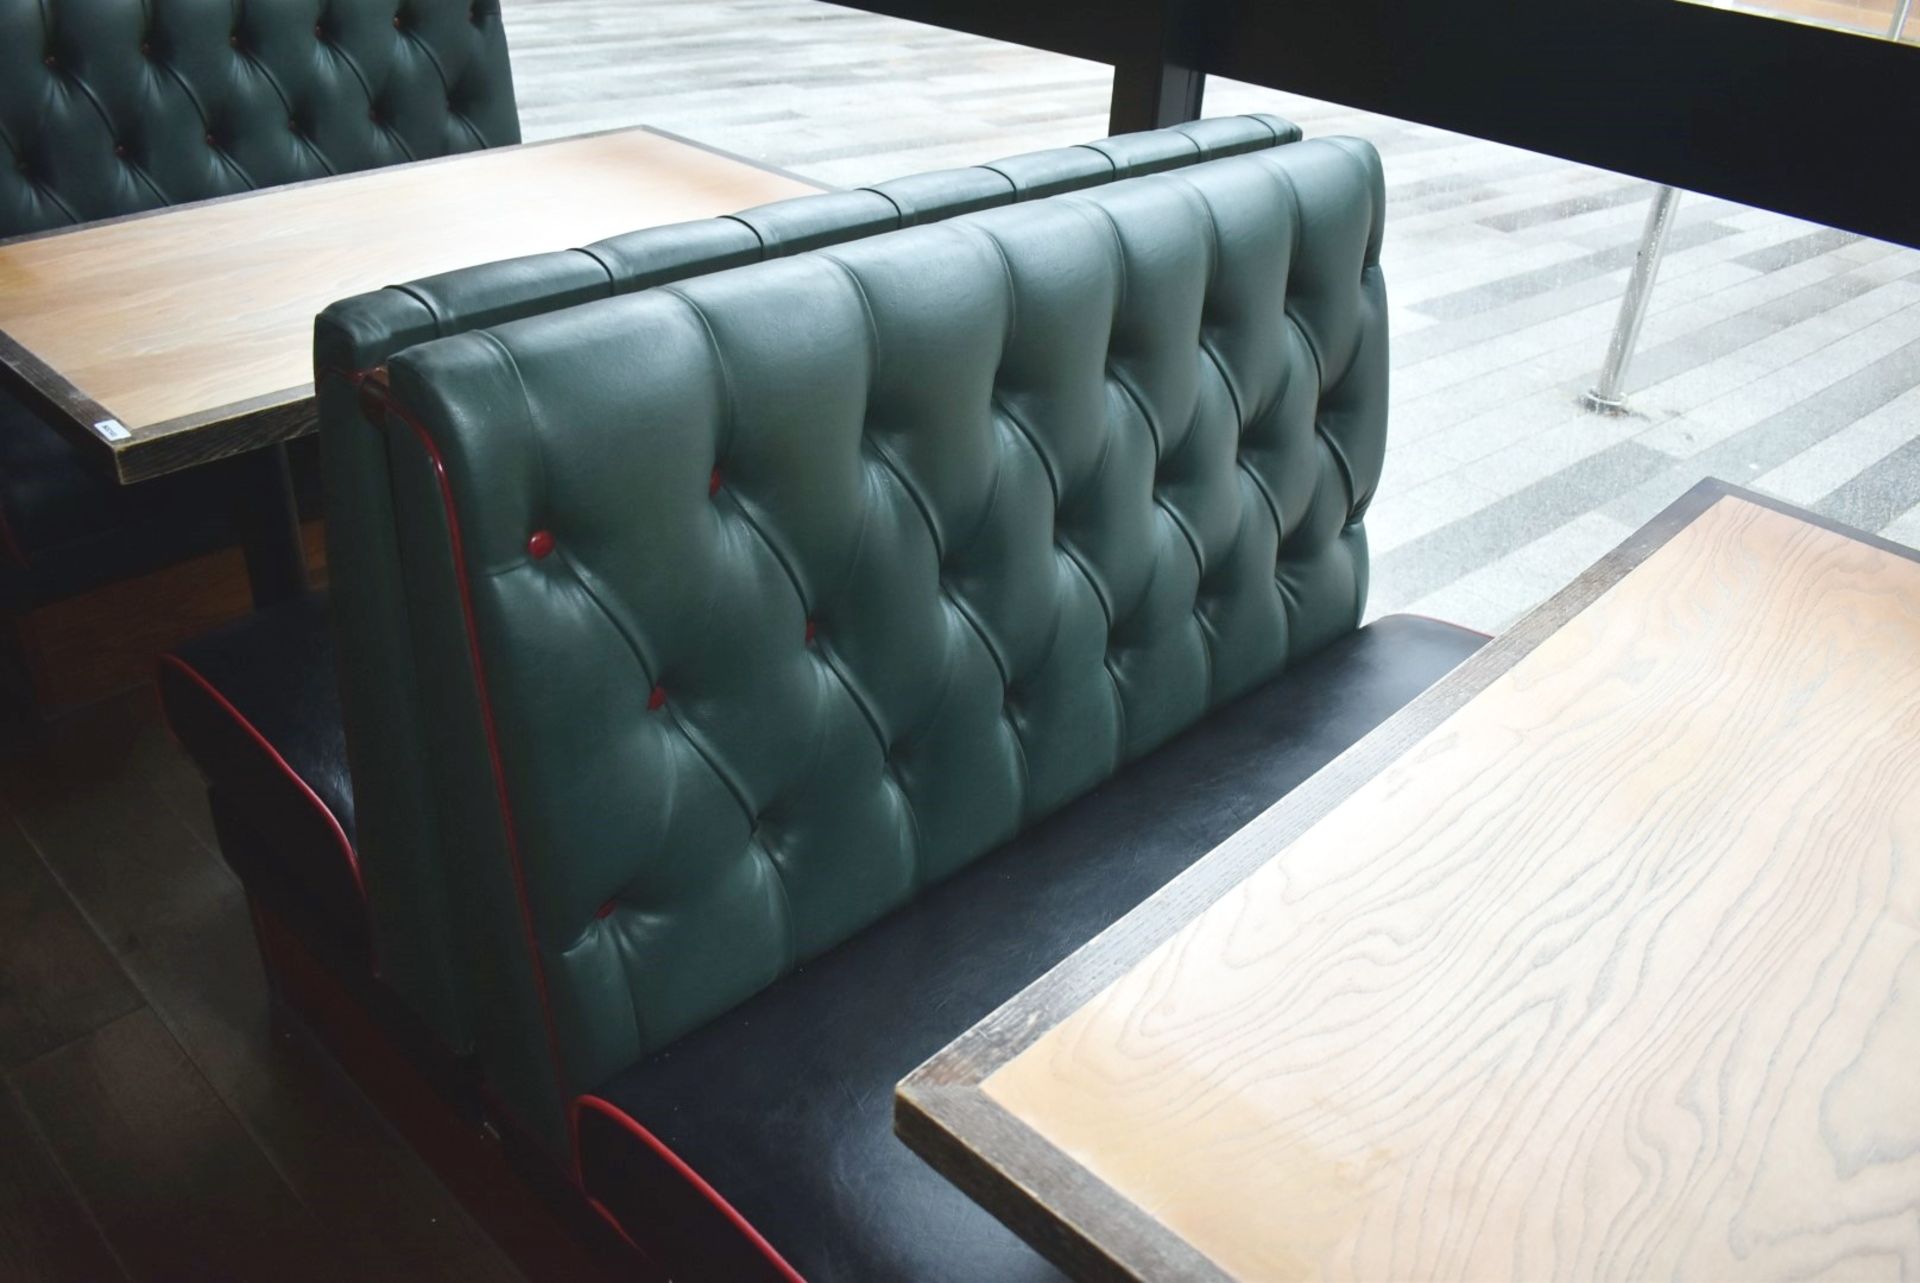 4 x Sections of Restaurant Double Booth Seating - Sits Up to 12 Persons - Green & Black Upholstery - Image 12 of 24